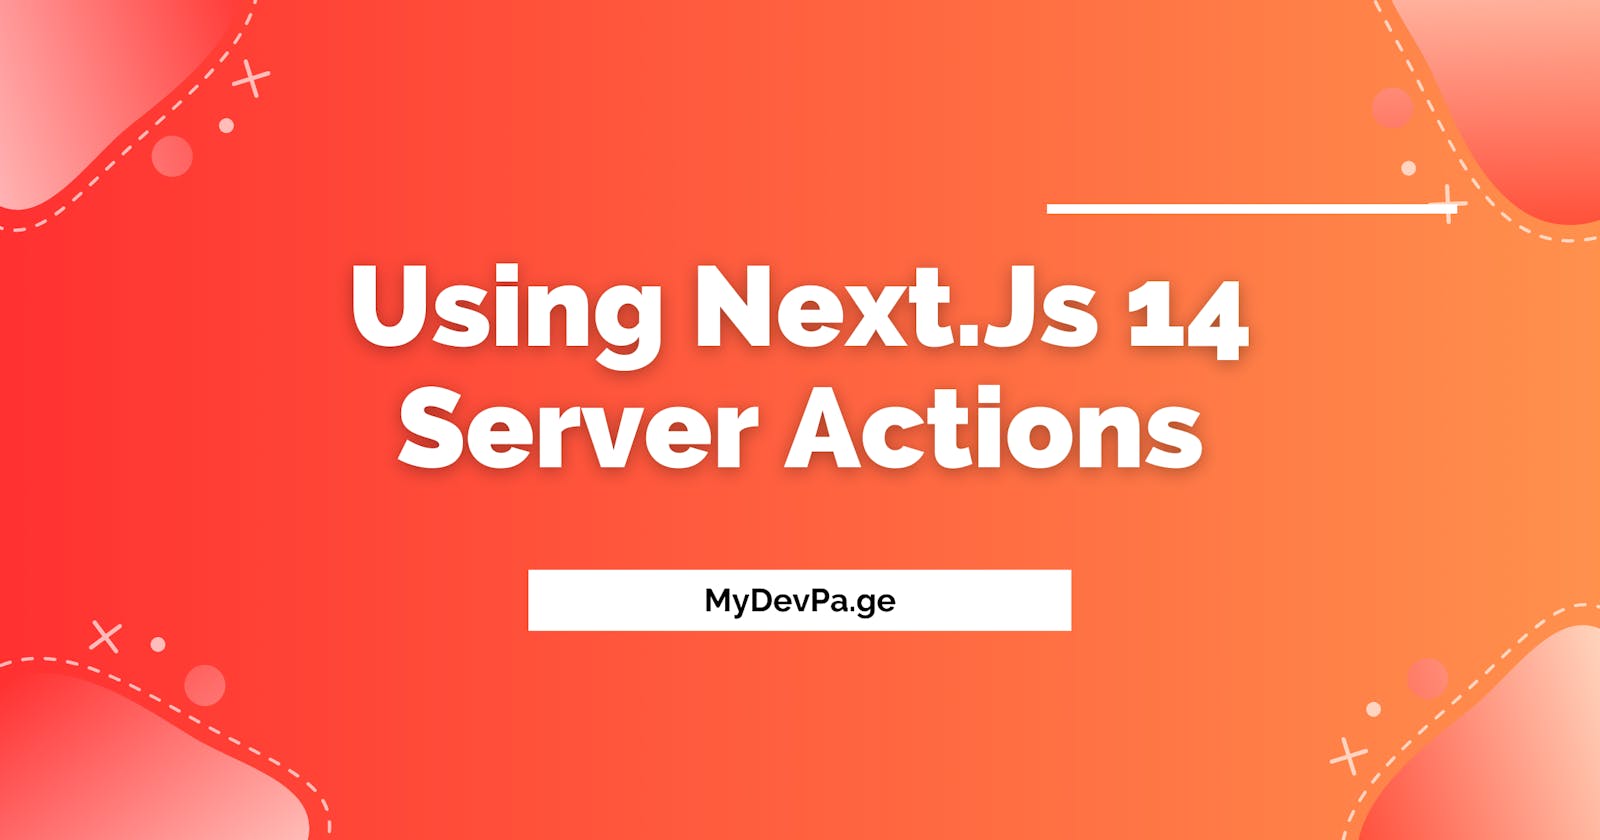 How to use Next.Js 14 Server Actions